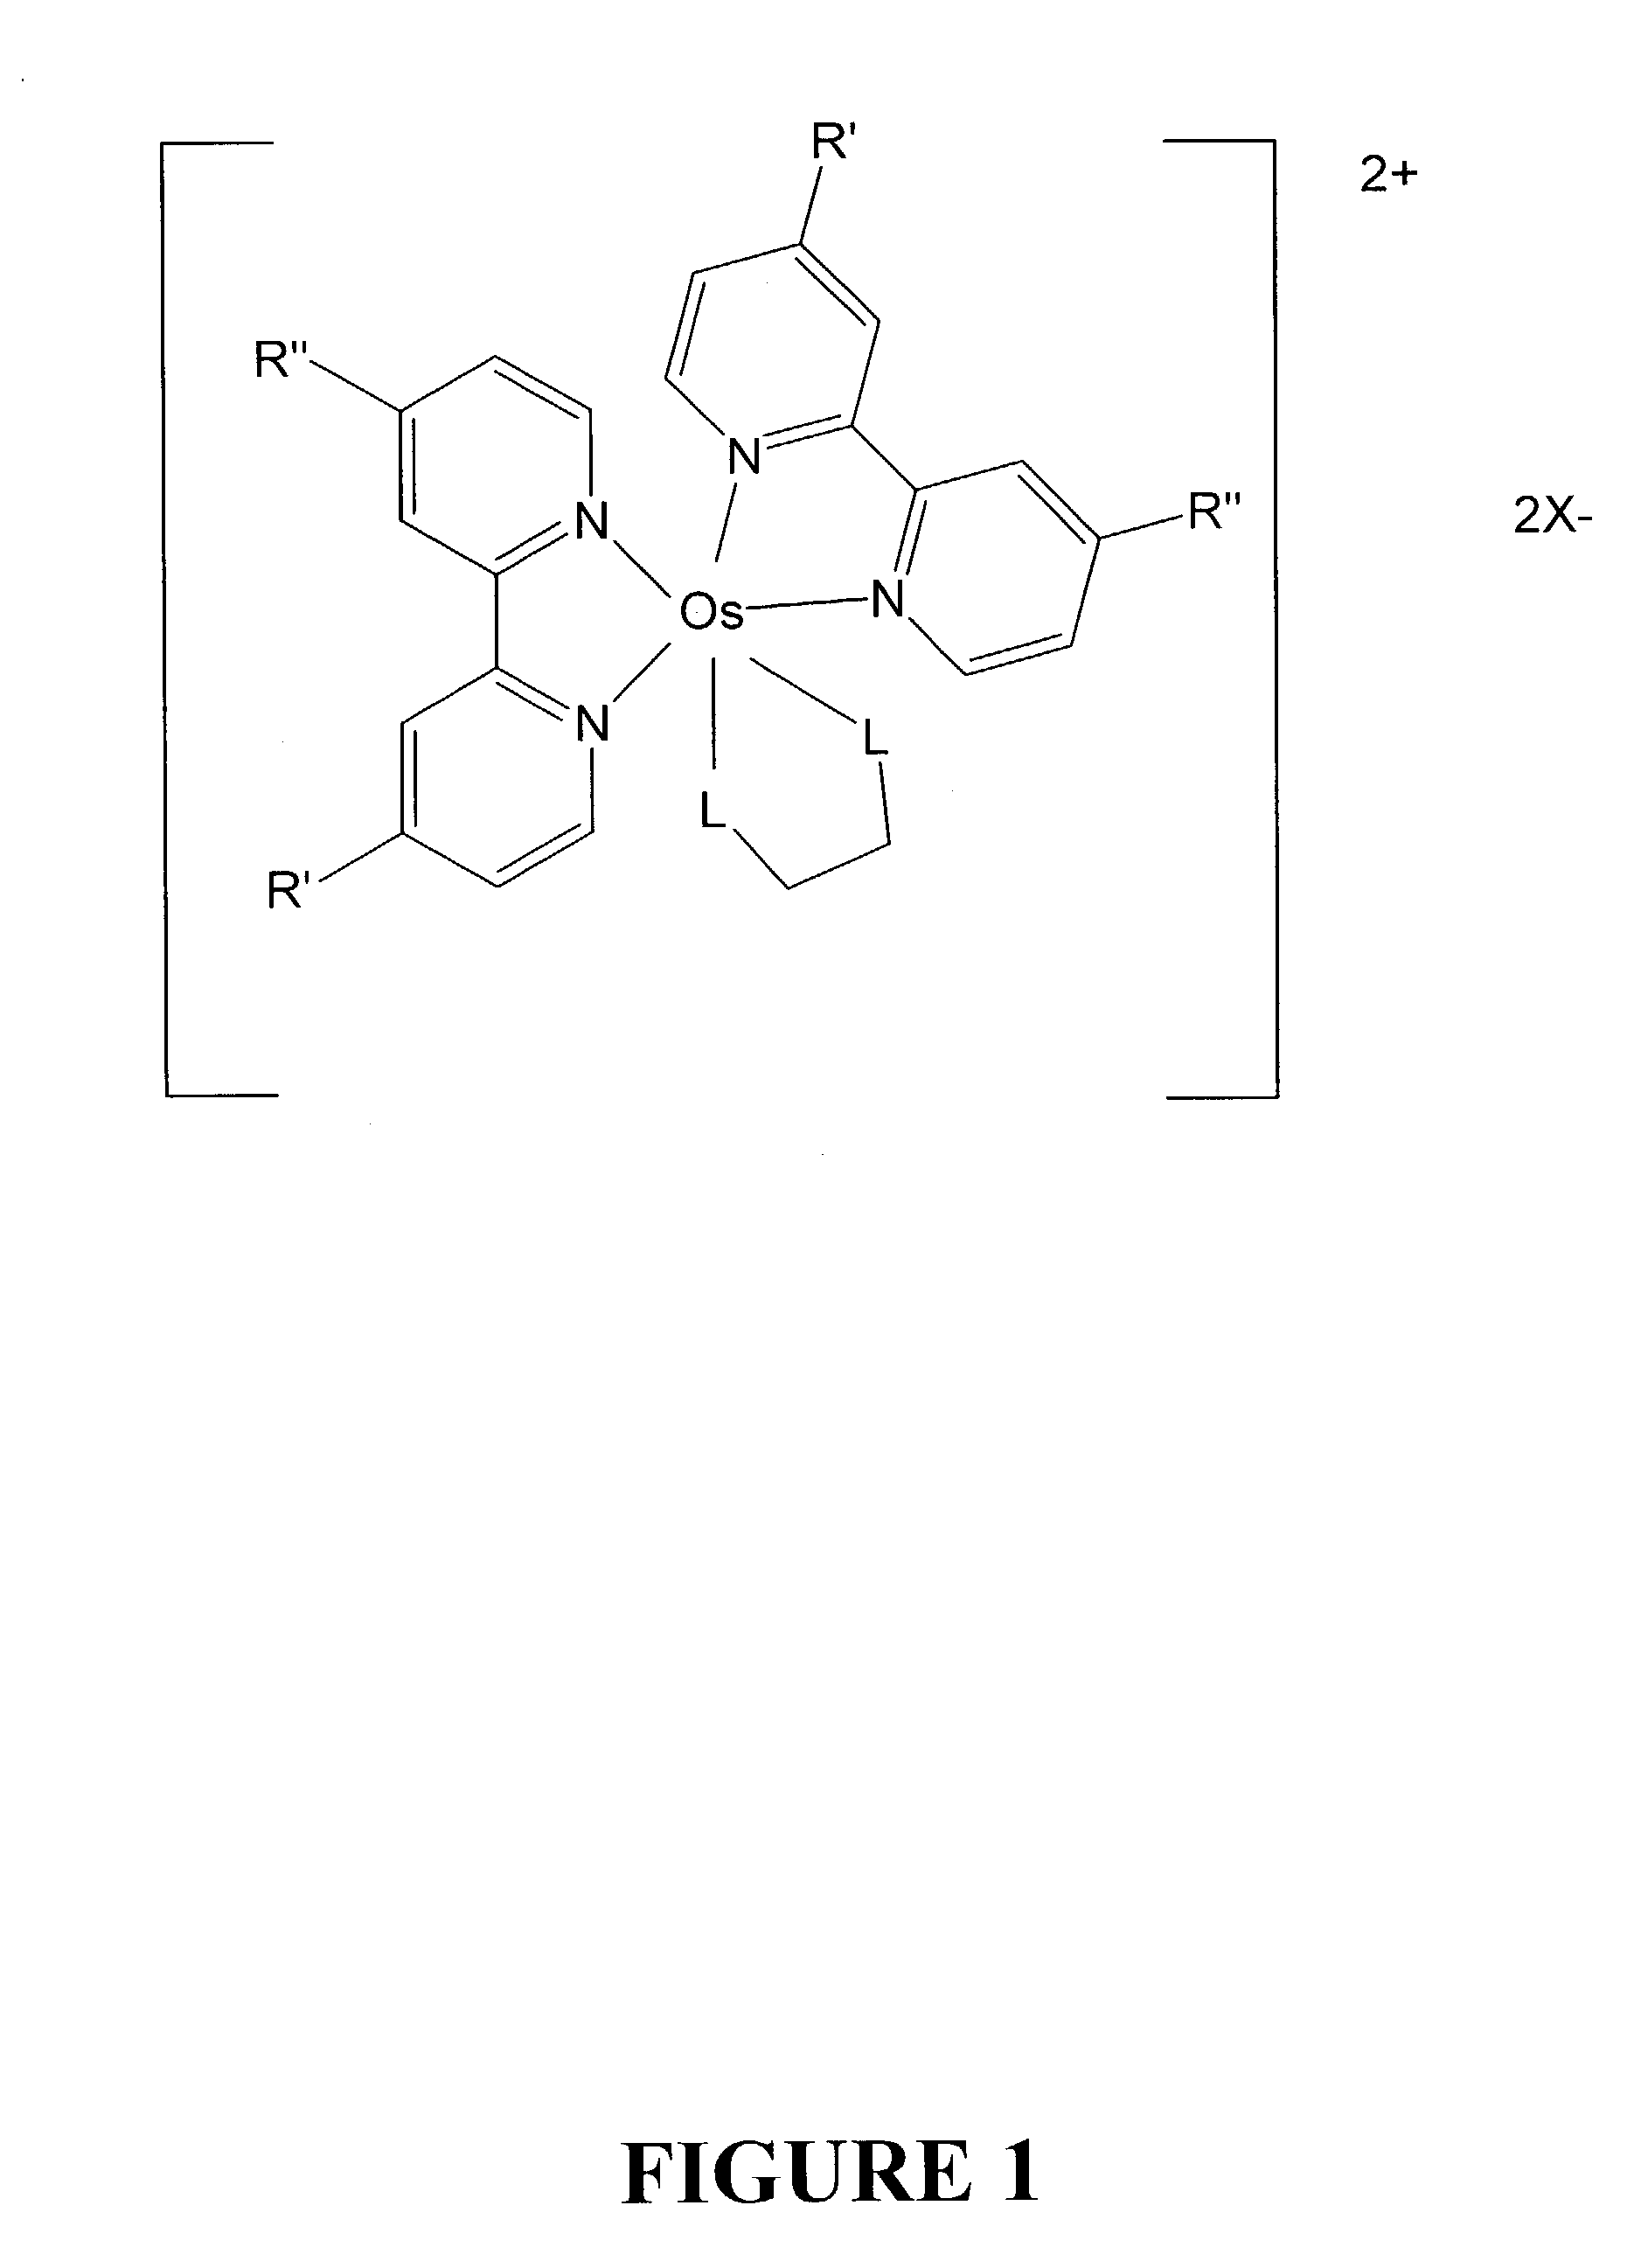 Osmium complexes and related organic light-emitting devices